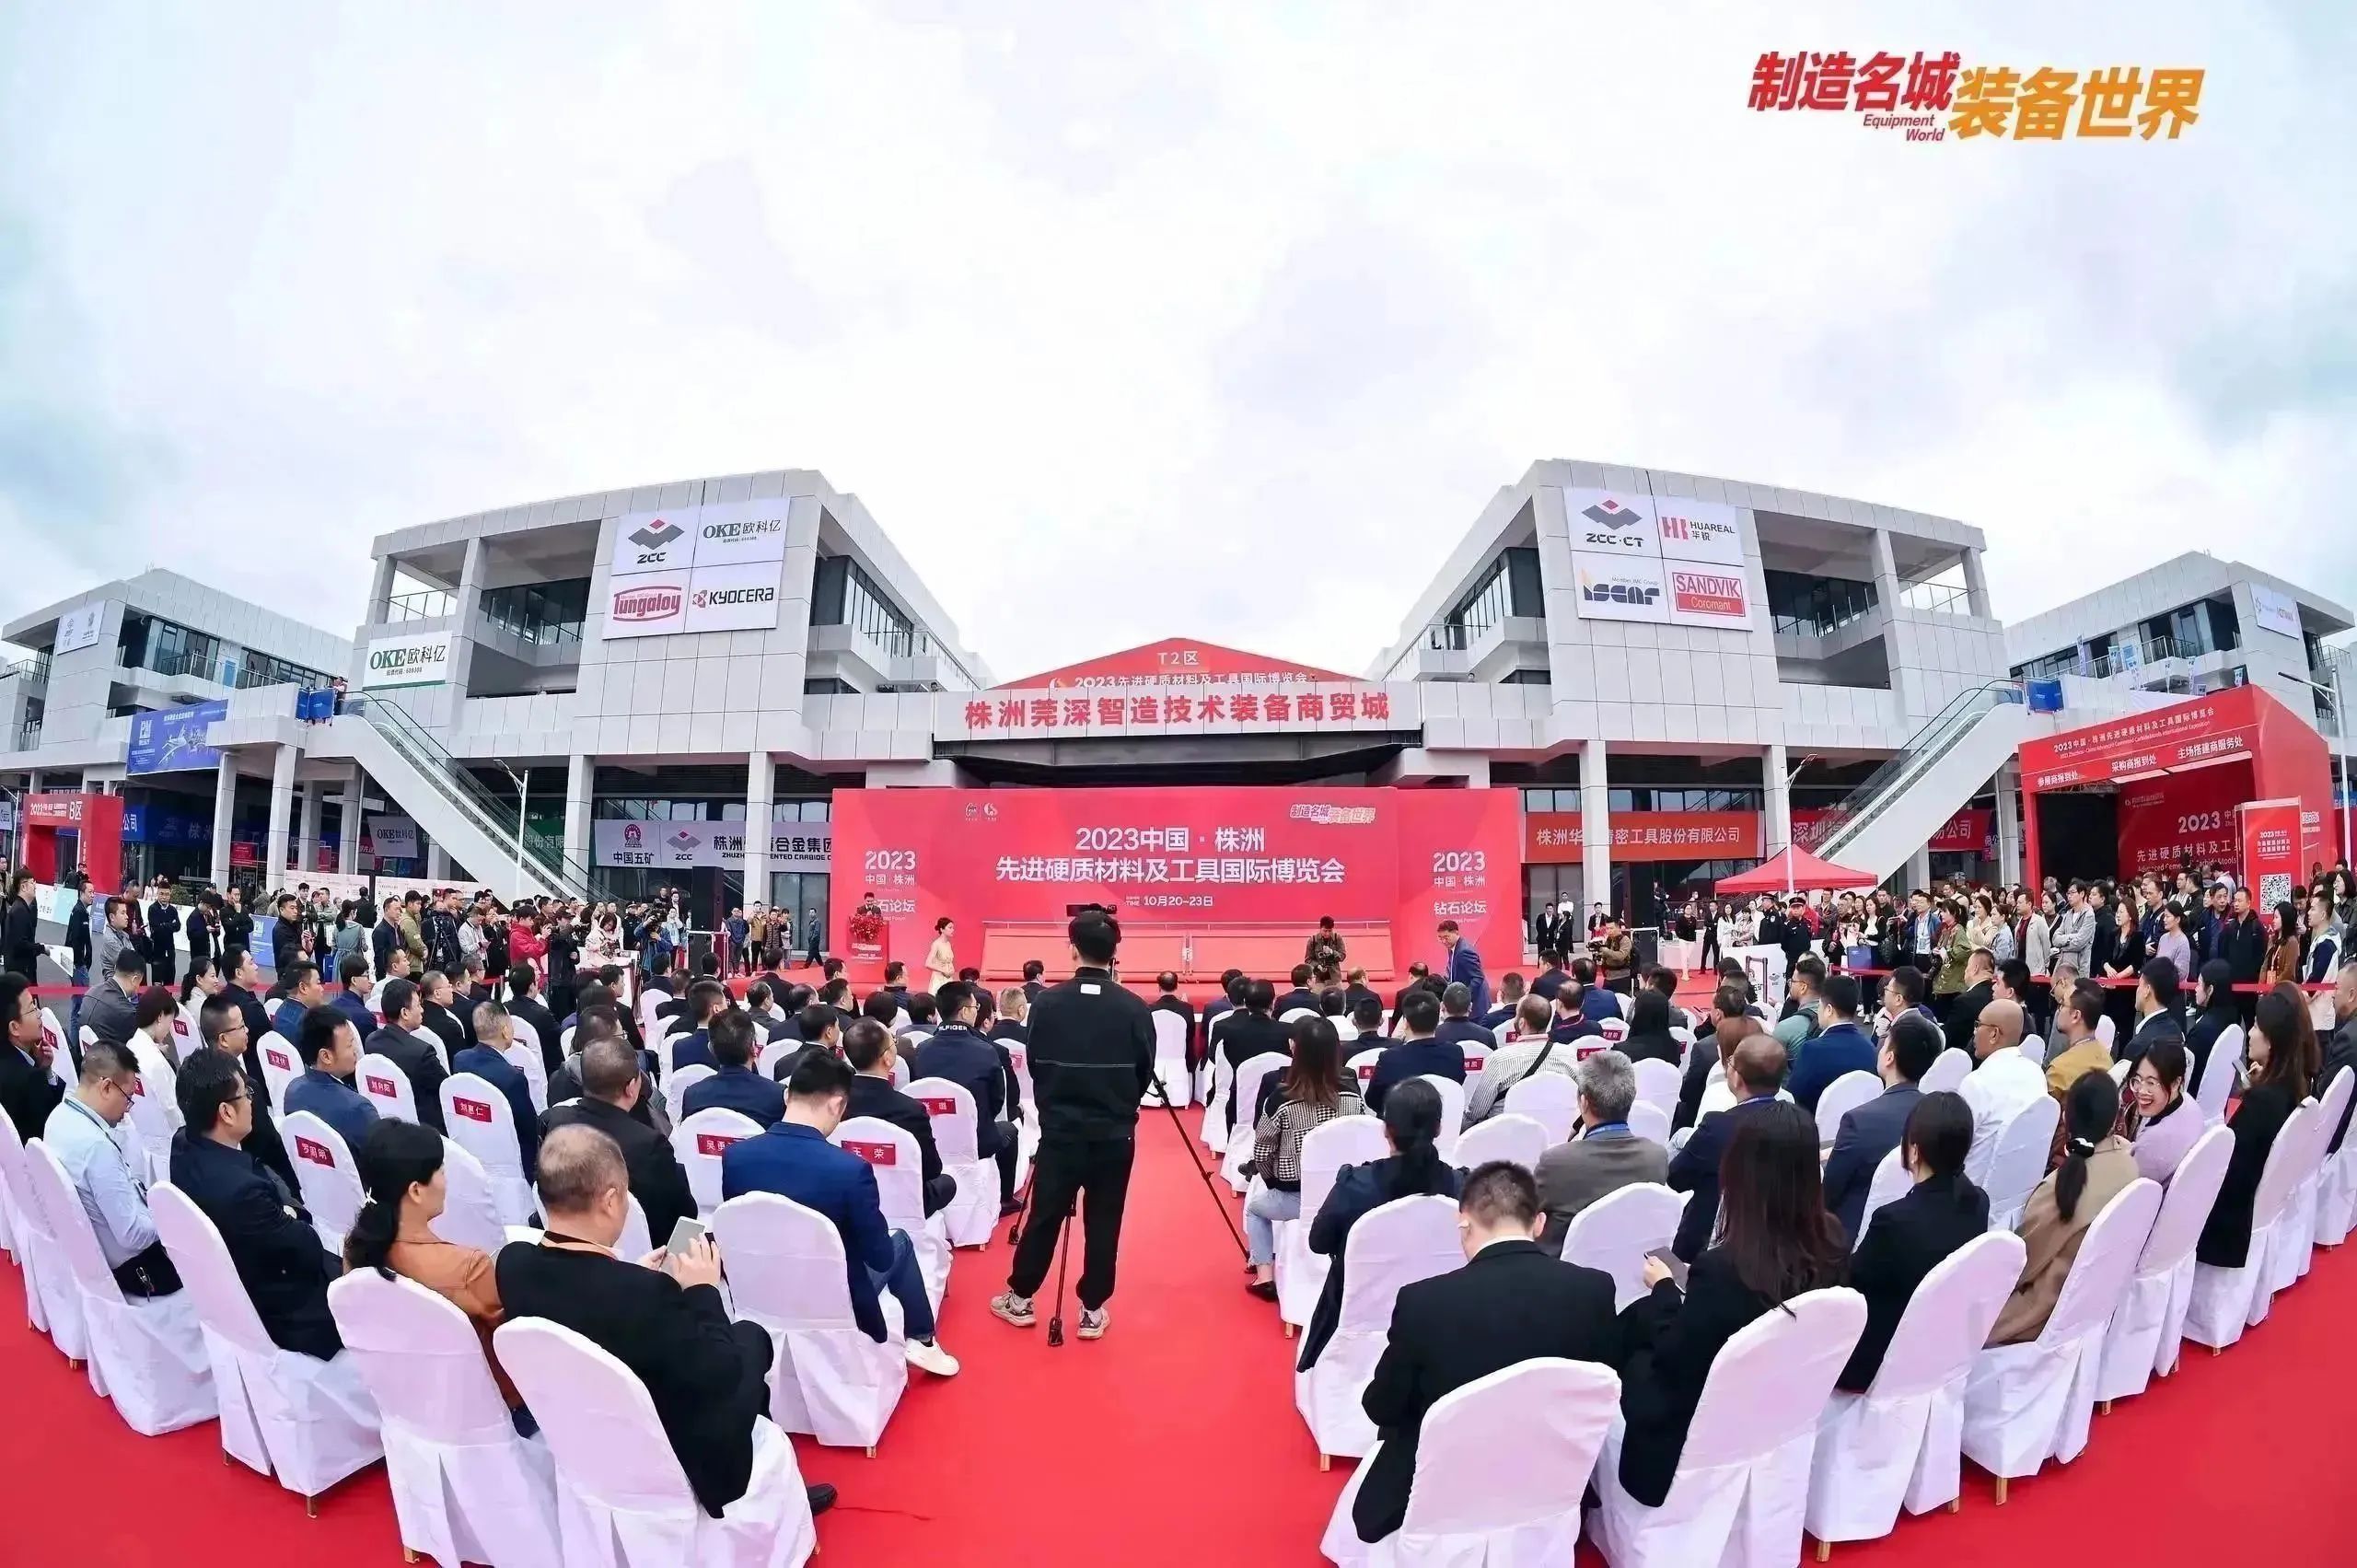 2023 CHINA-ZHUZHOU Advanced Cemented Carbide&Tools Exposition